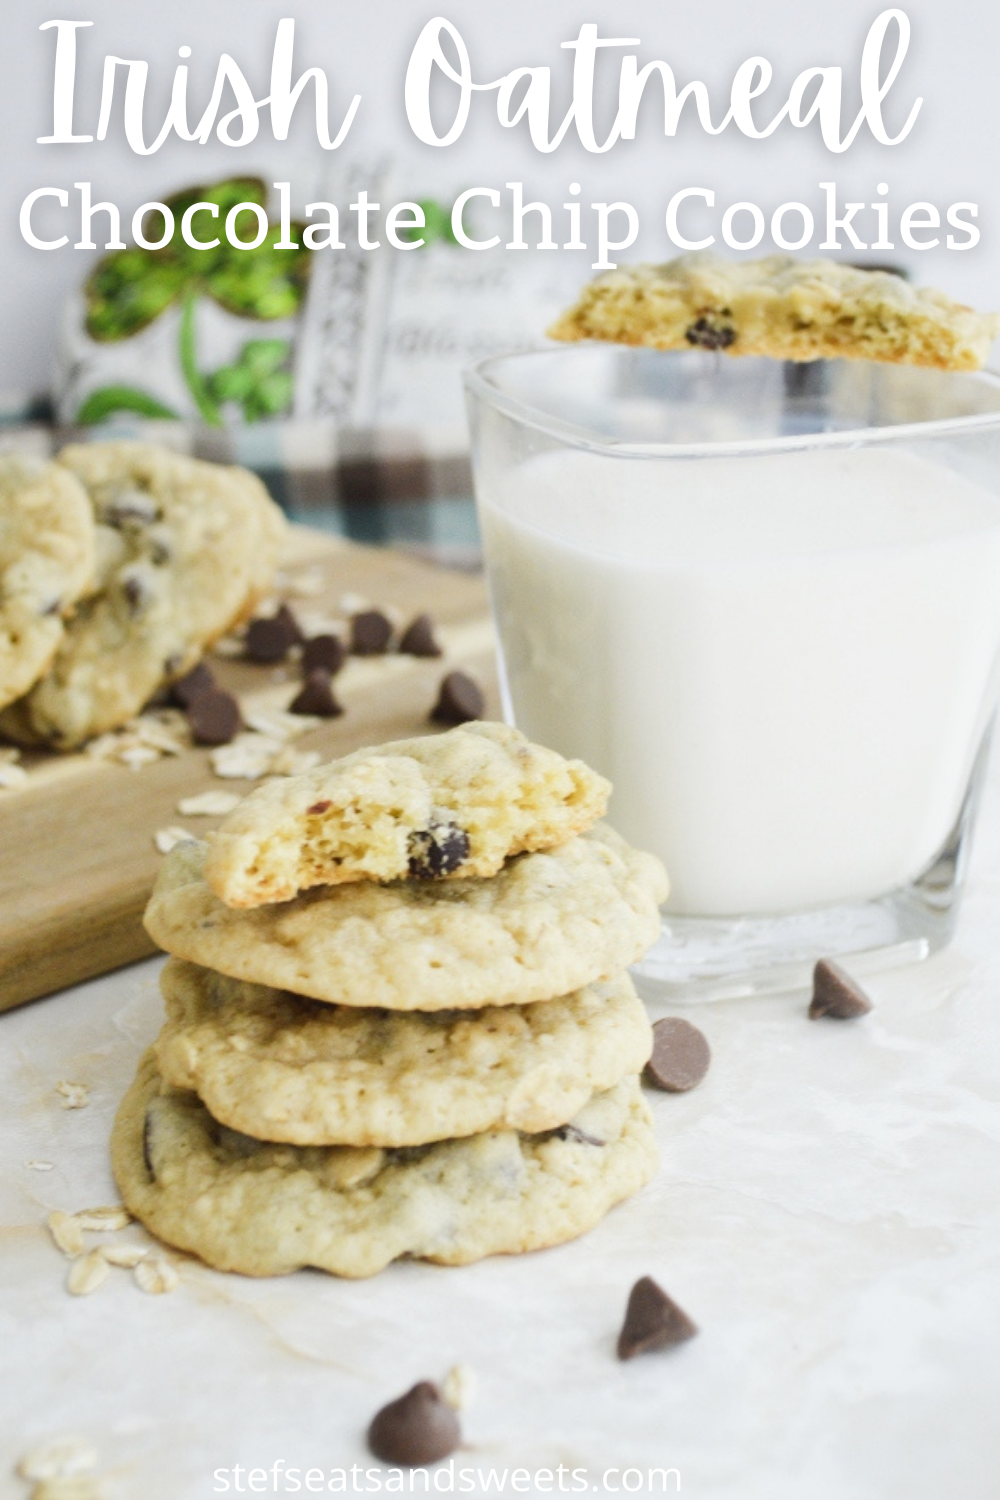 Irish Oatmeal Chocolate Chip Cookies Pinterest Image with Text 